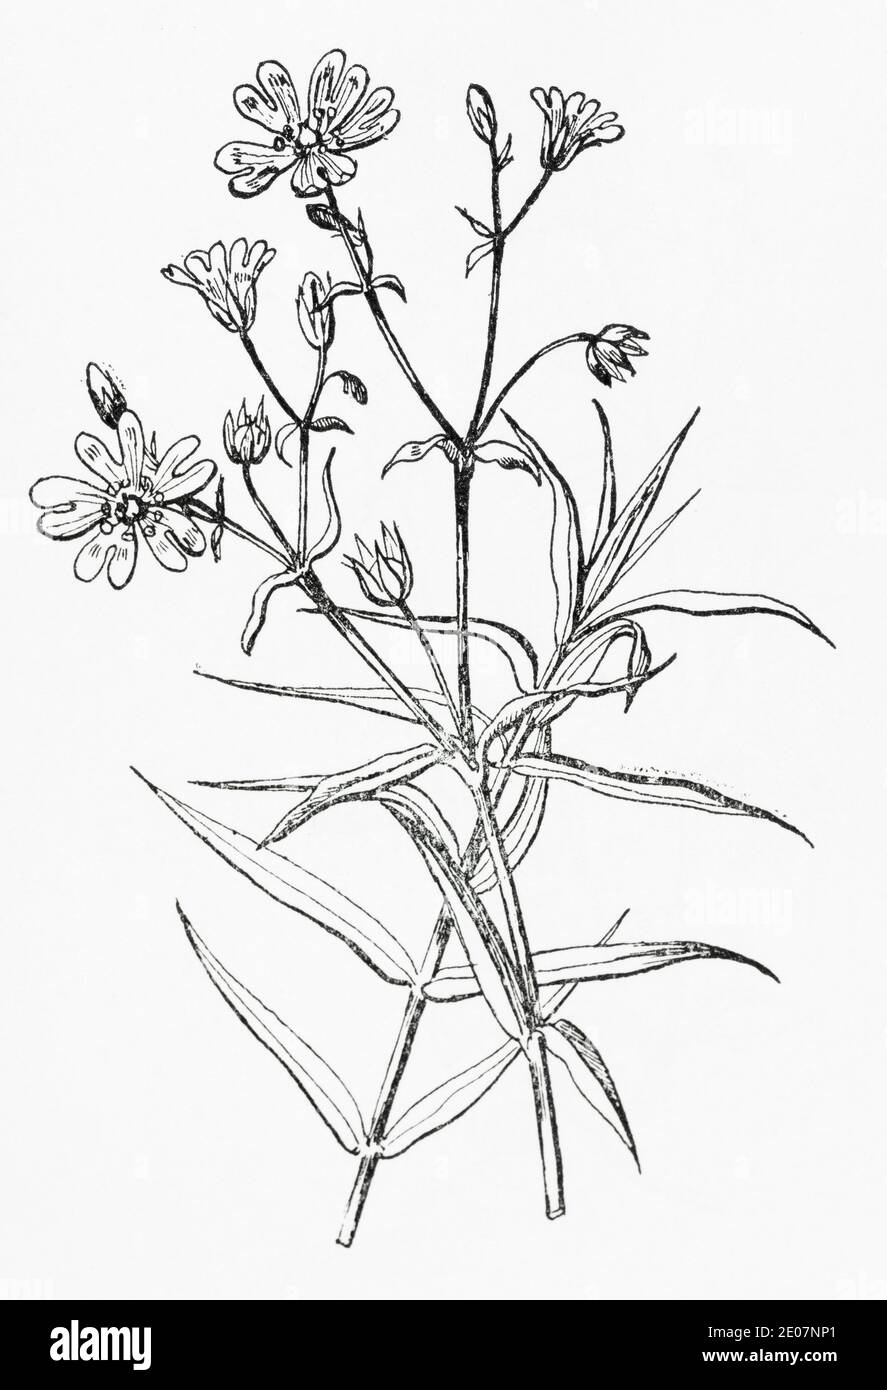 Old botanical illustration engraving of Greater Stitchwort / Stellaria holostea. Traditional medicinal herbal plant. See Notes Stock Photo